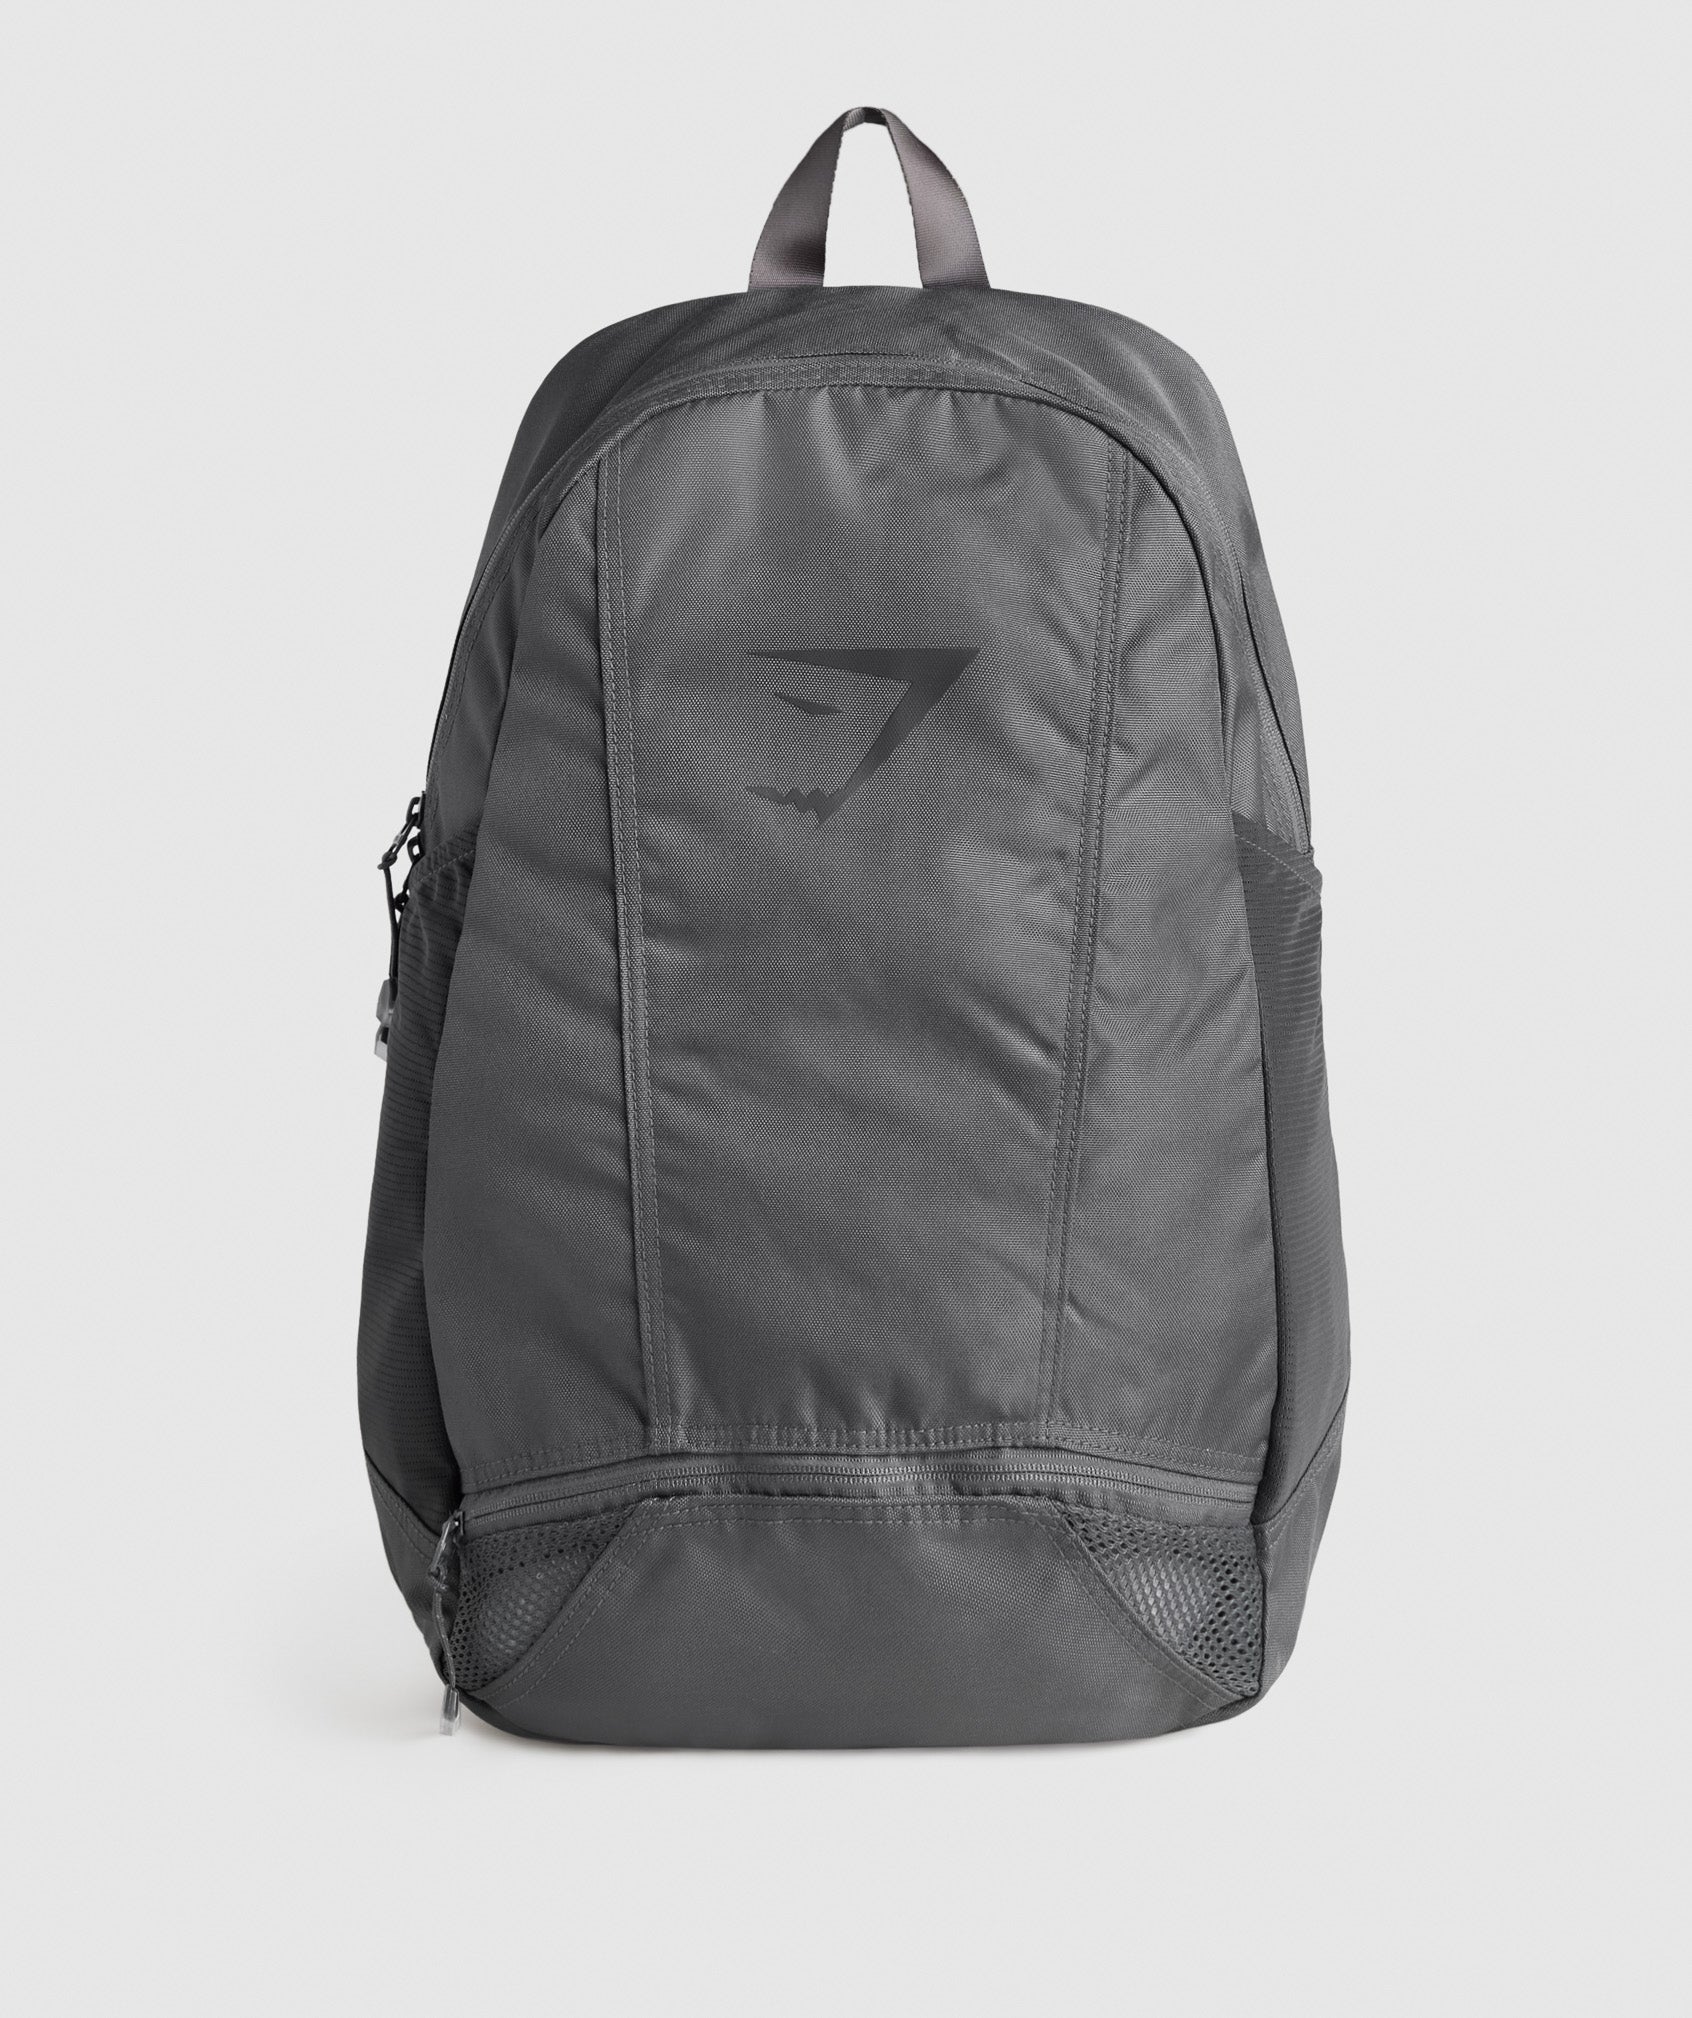 Sharkhead Backpack in Graphite Grey - view 1